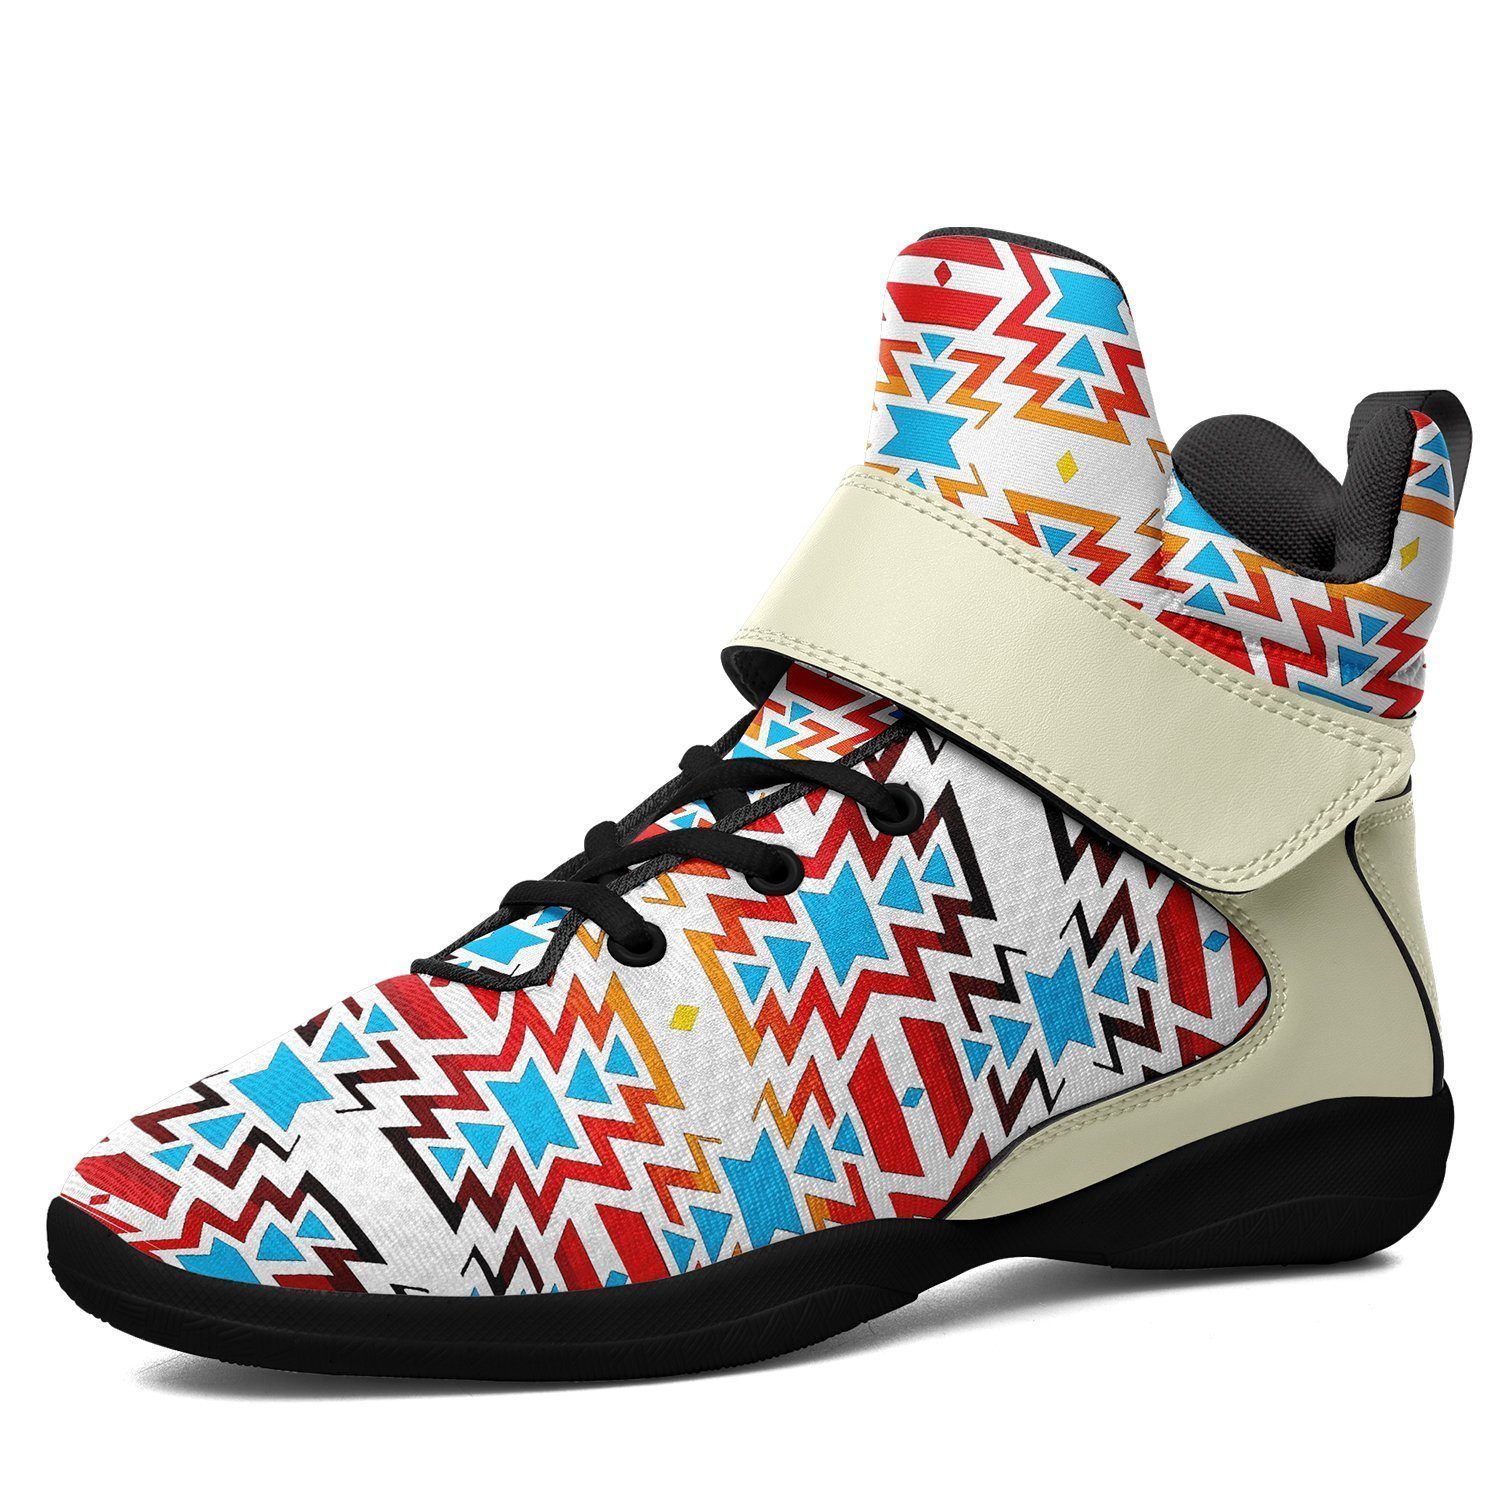 Fire Colors and Sky Ipottaa Basketball / Sport High Top Shoes - Black Sole 49 Dzine US Men 7 / EUR 40 Black Sole with Cream Strap 